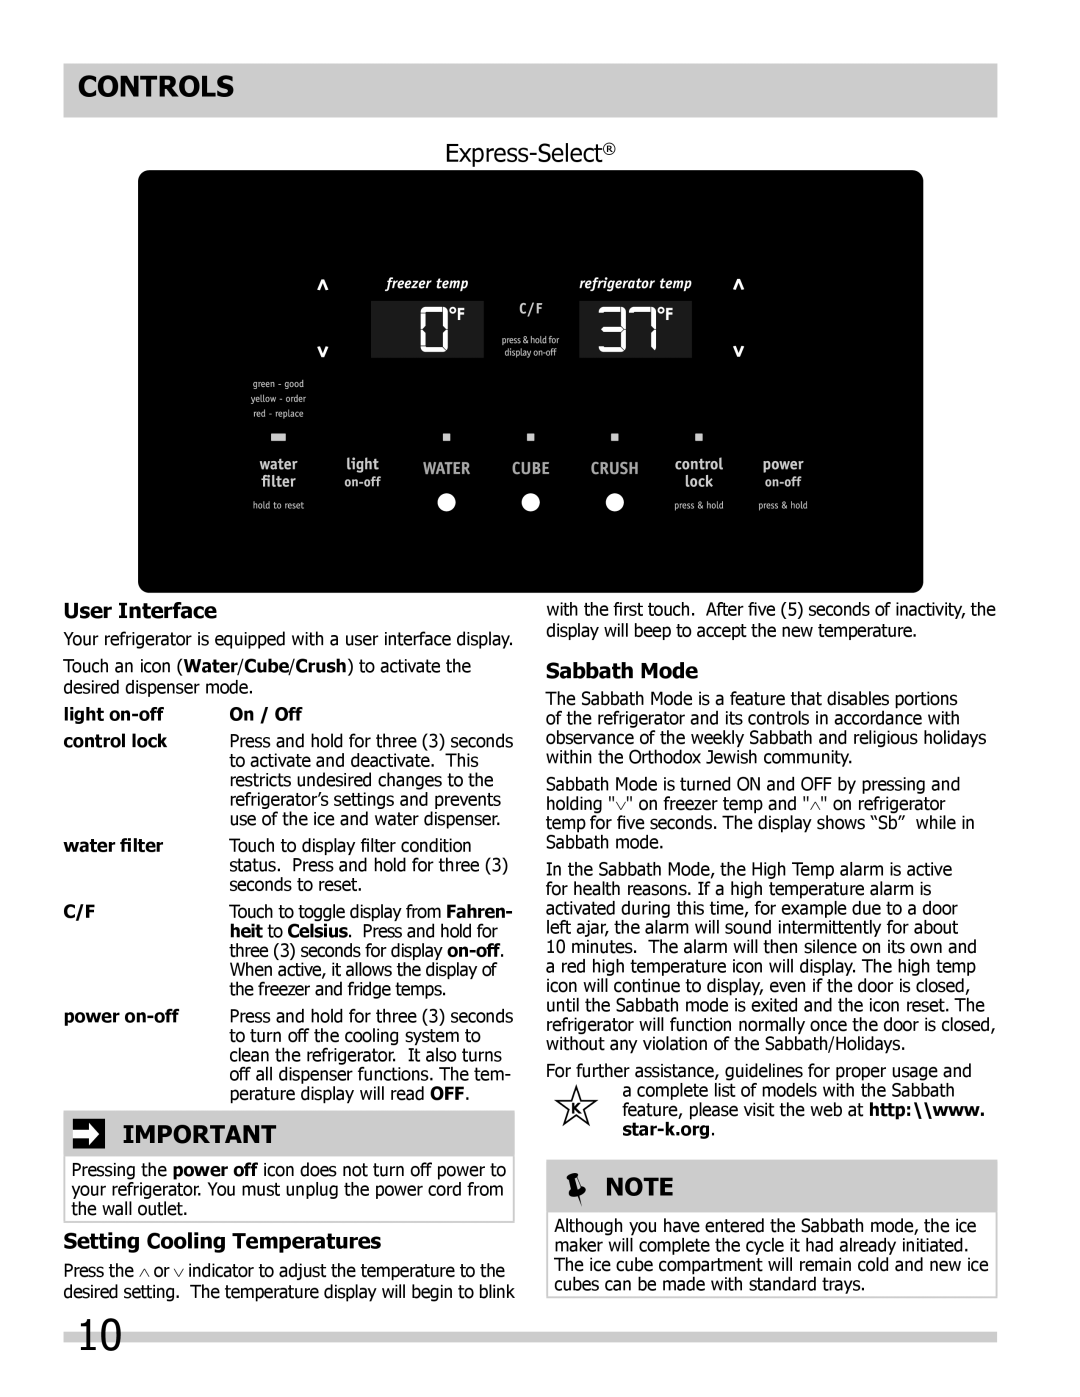 Frigidaire FGHS2332LE Controls, Express-Select, User Interface, Setting Cooling Temperatures, Sabbath Mode, light on-off 